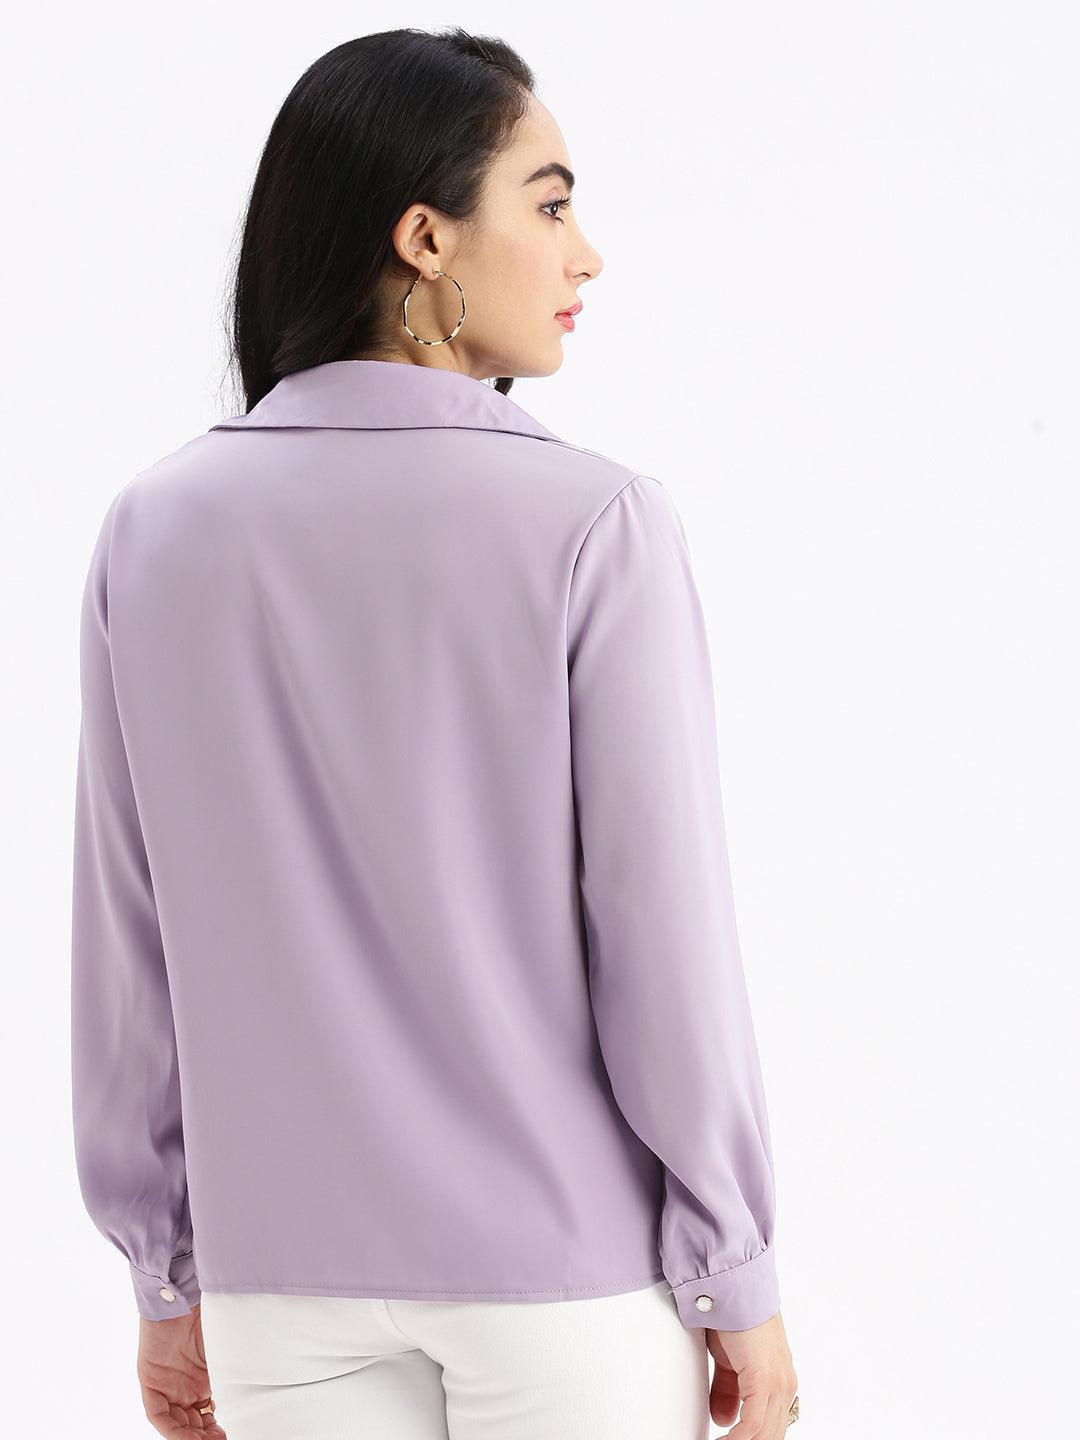 Women Solid Lavender Top with Neck Chain